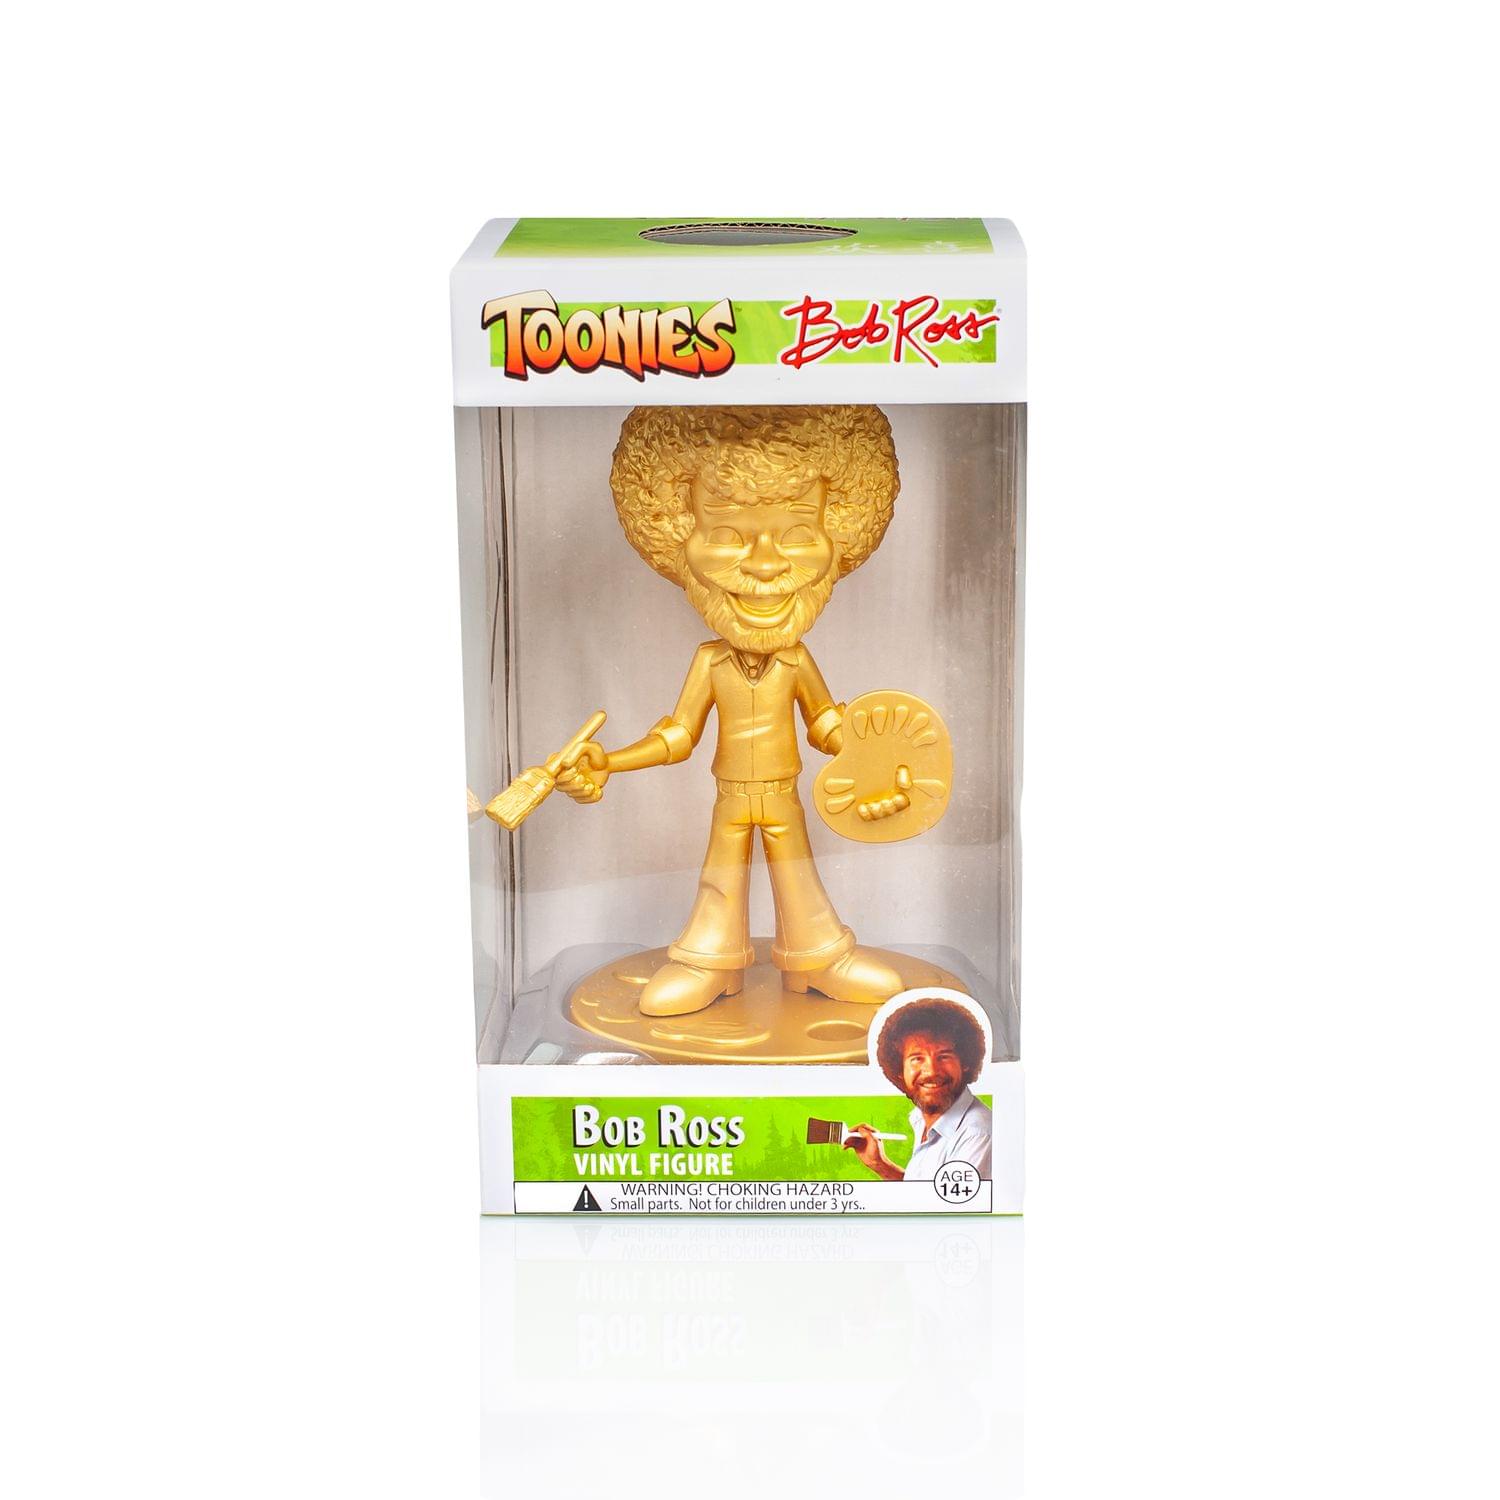 Bob Ross Happy Tree Collectible 6" Figure Statue by Toonies - Gold Variant Version